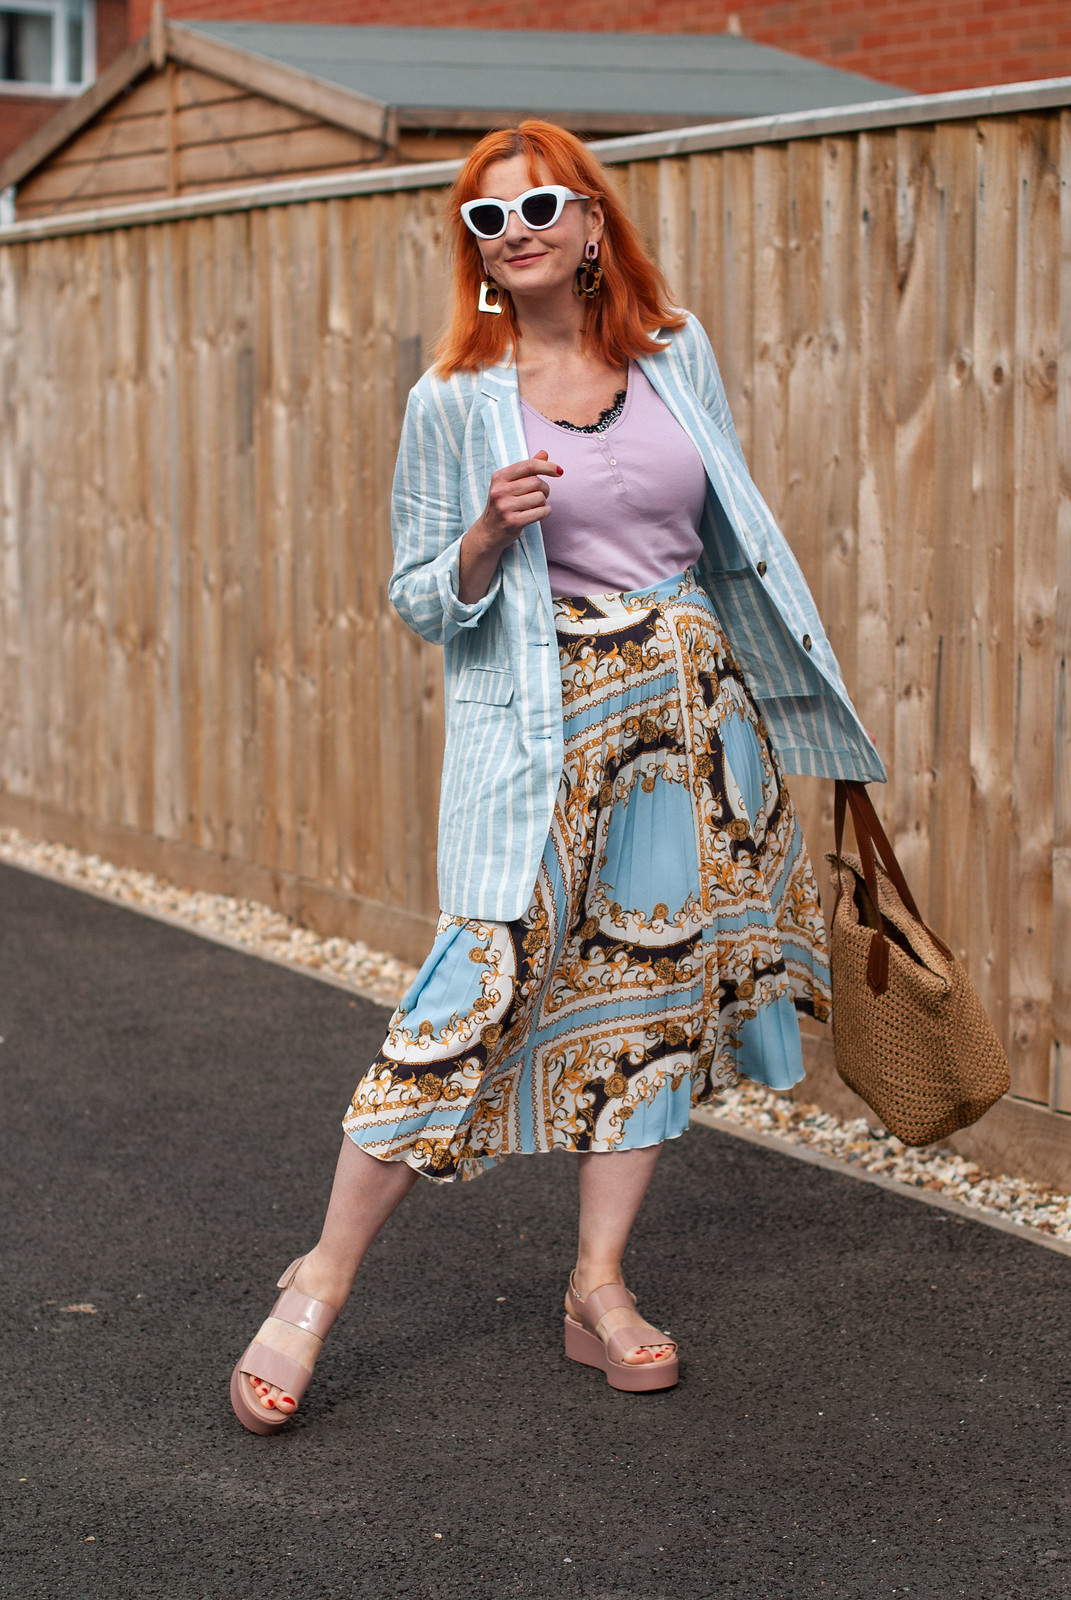 How to Style a Patterned Pleated Midi Skirt in Summer | Not Dressed As Lamb, Over 40 Fashion and Style